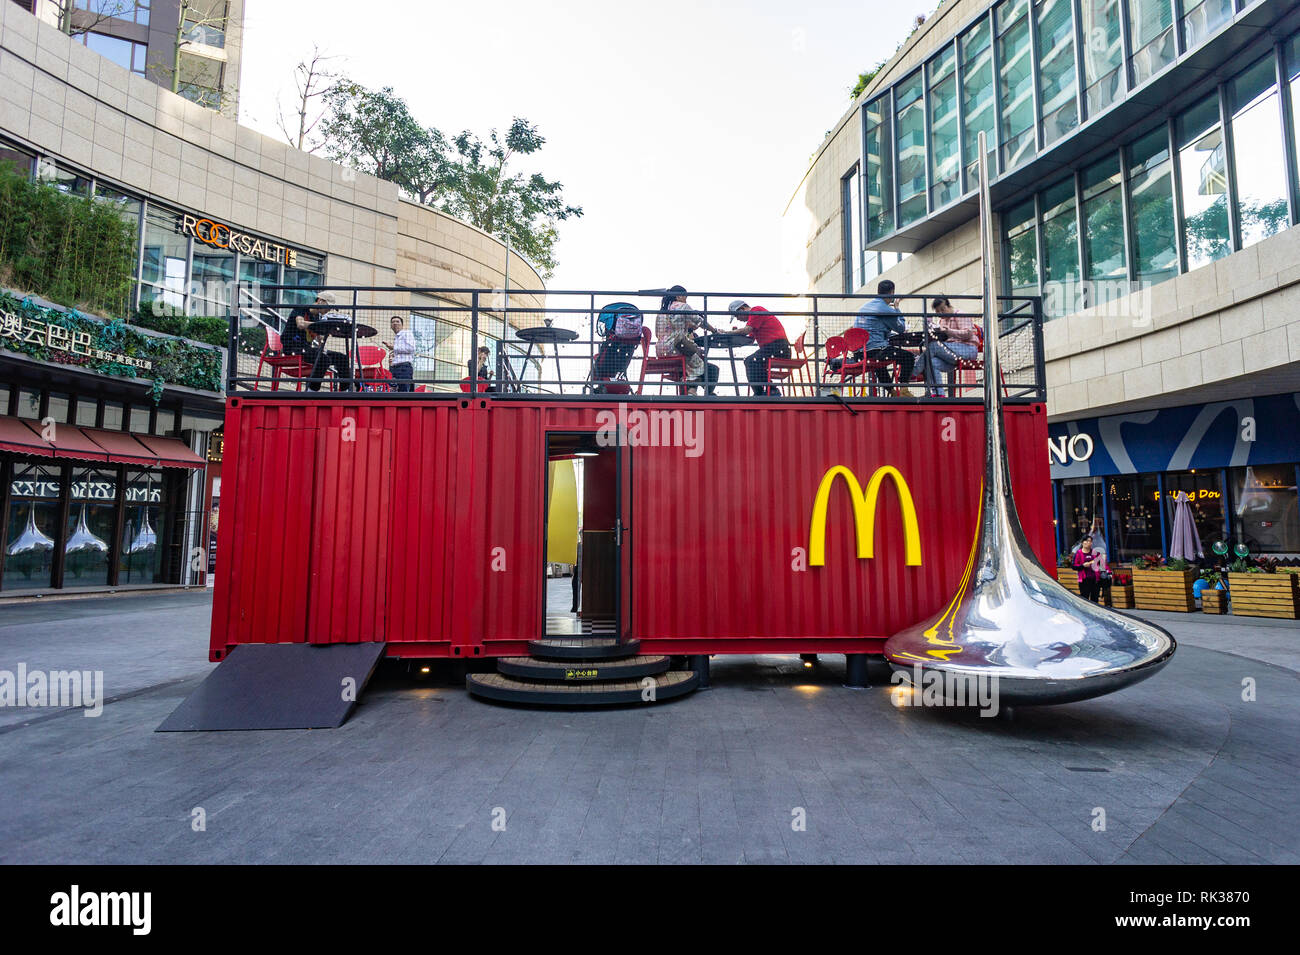 https://c8.alamy.com/comp/RK3870/shipping-container-recycled-into-mcdonalds-pop-up-restaurant-in-shenzhen-china-RK3870.jpg